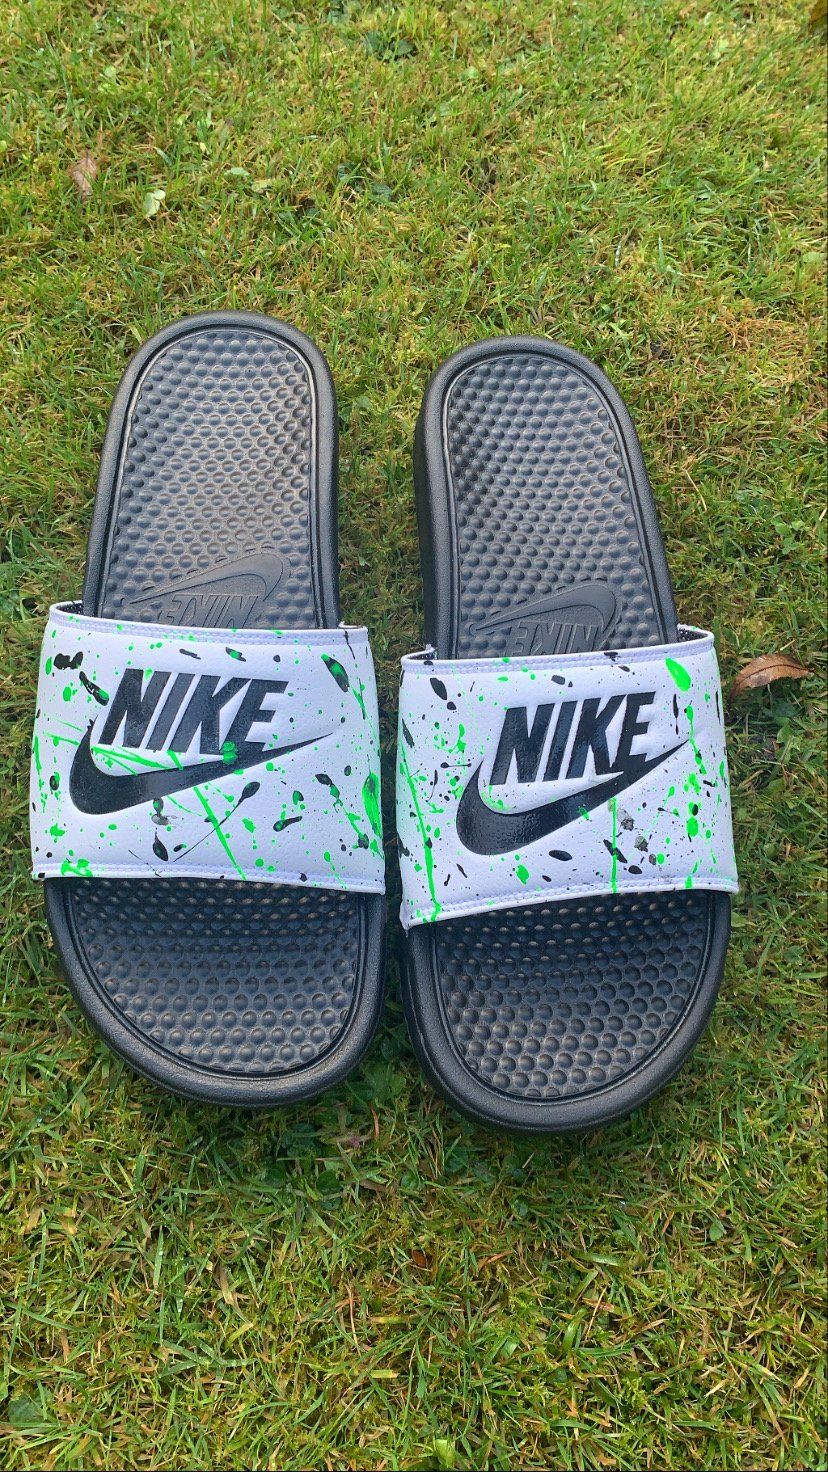 Nike slides neon green and black paint 